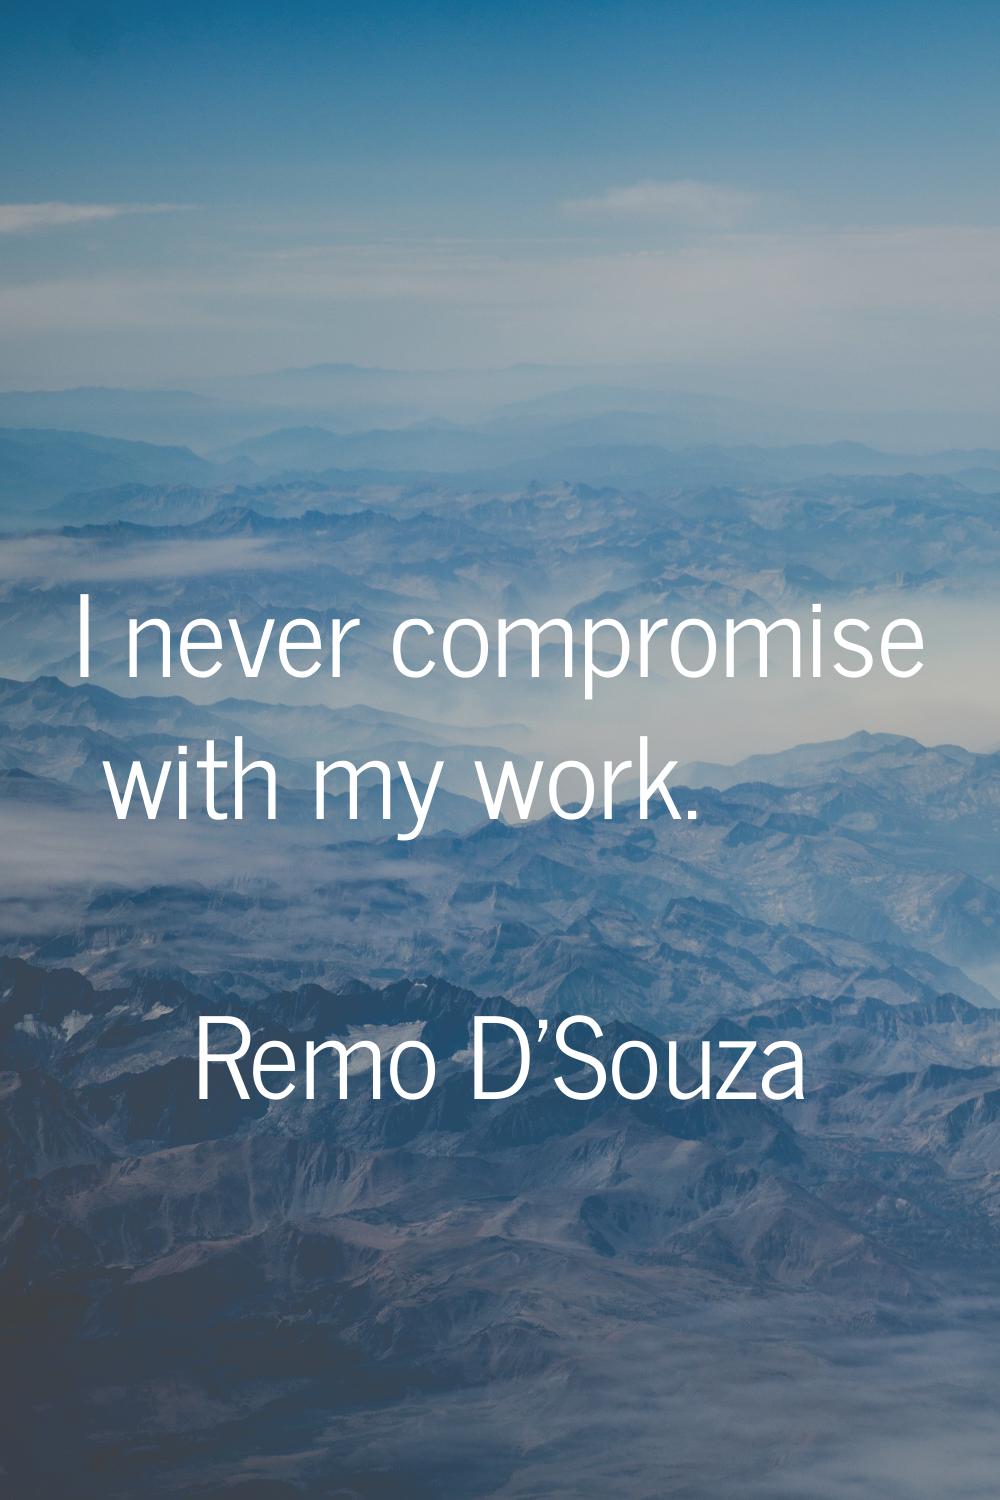 I never compromise with my work.